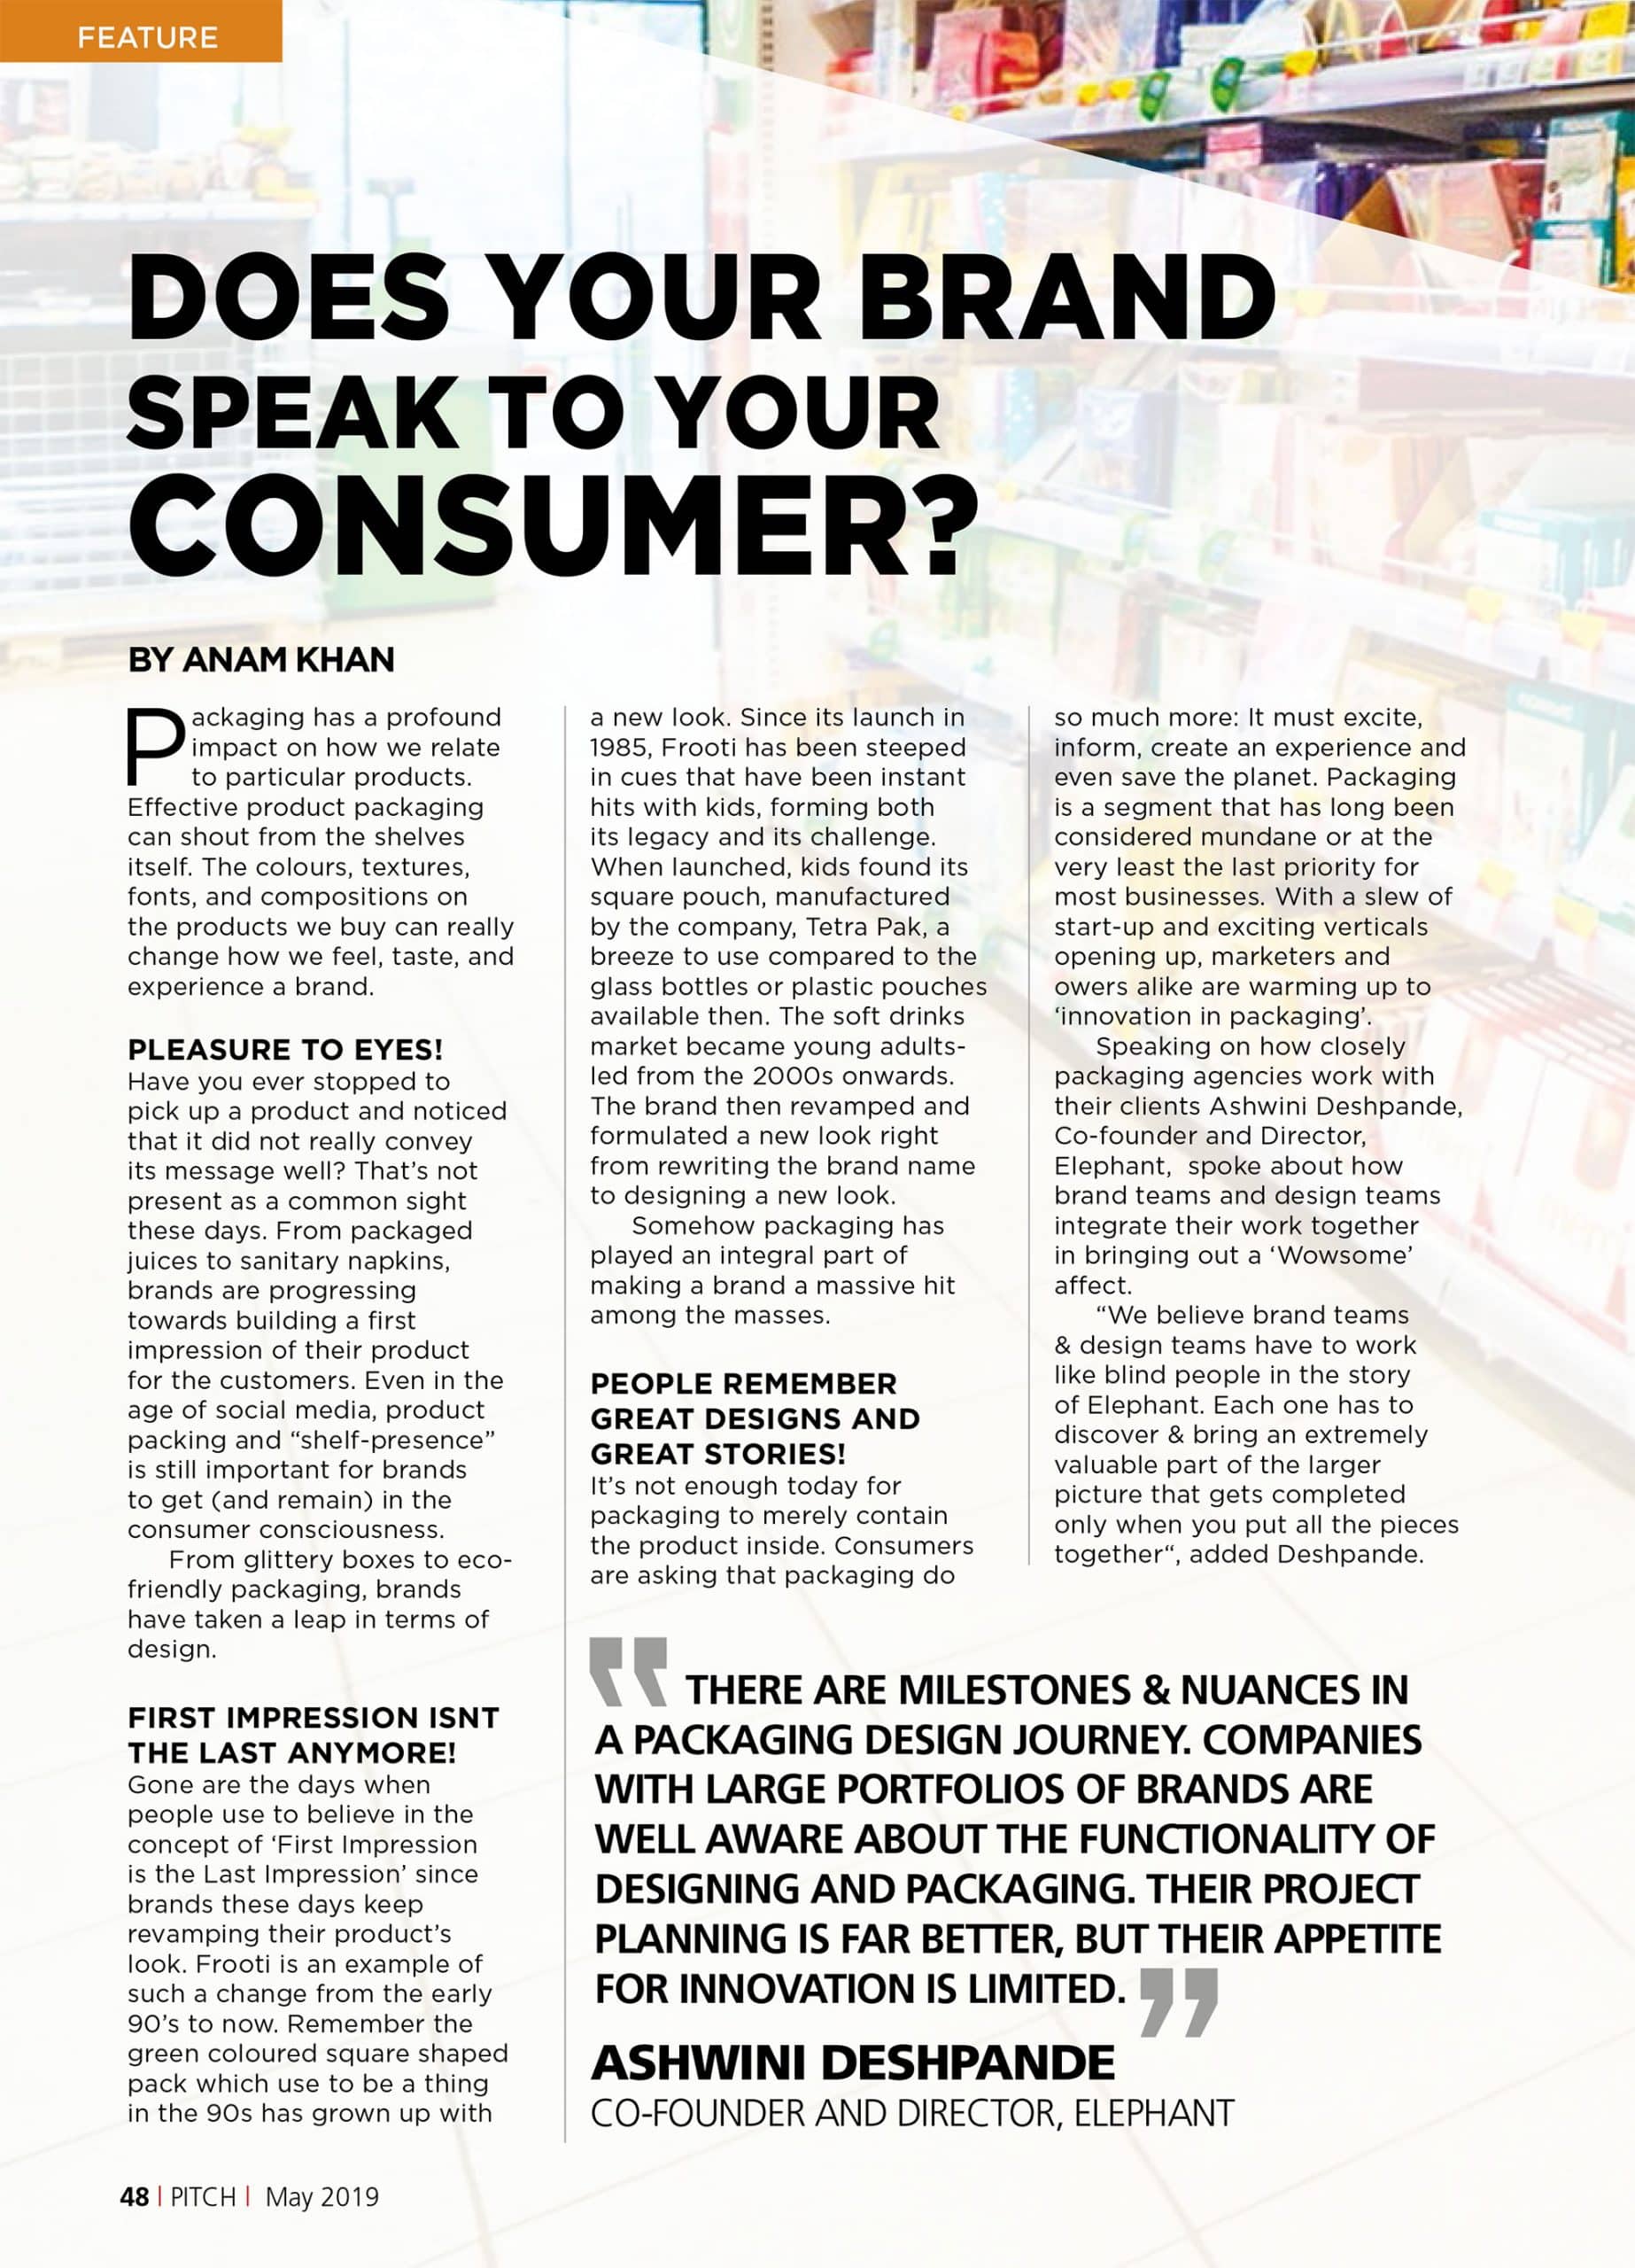 Does Your Brand Speak To Your Consumer? – Reports PITCH | May 2019 Print Edition